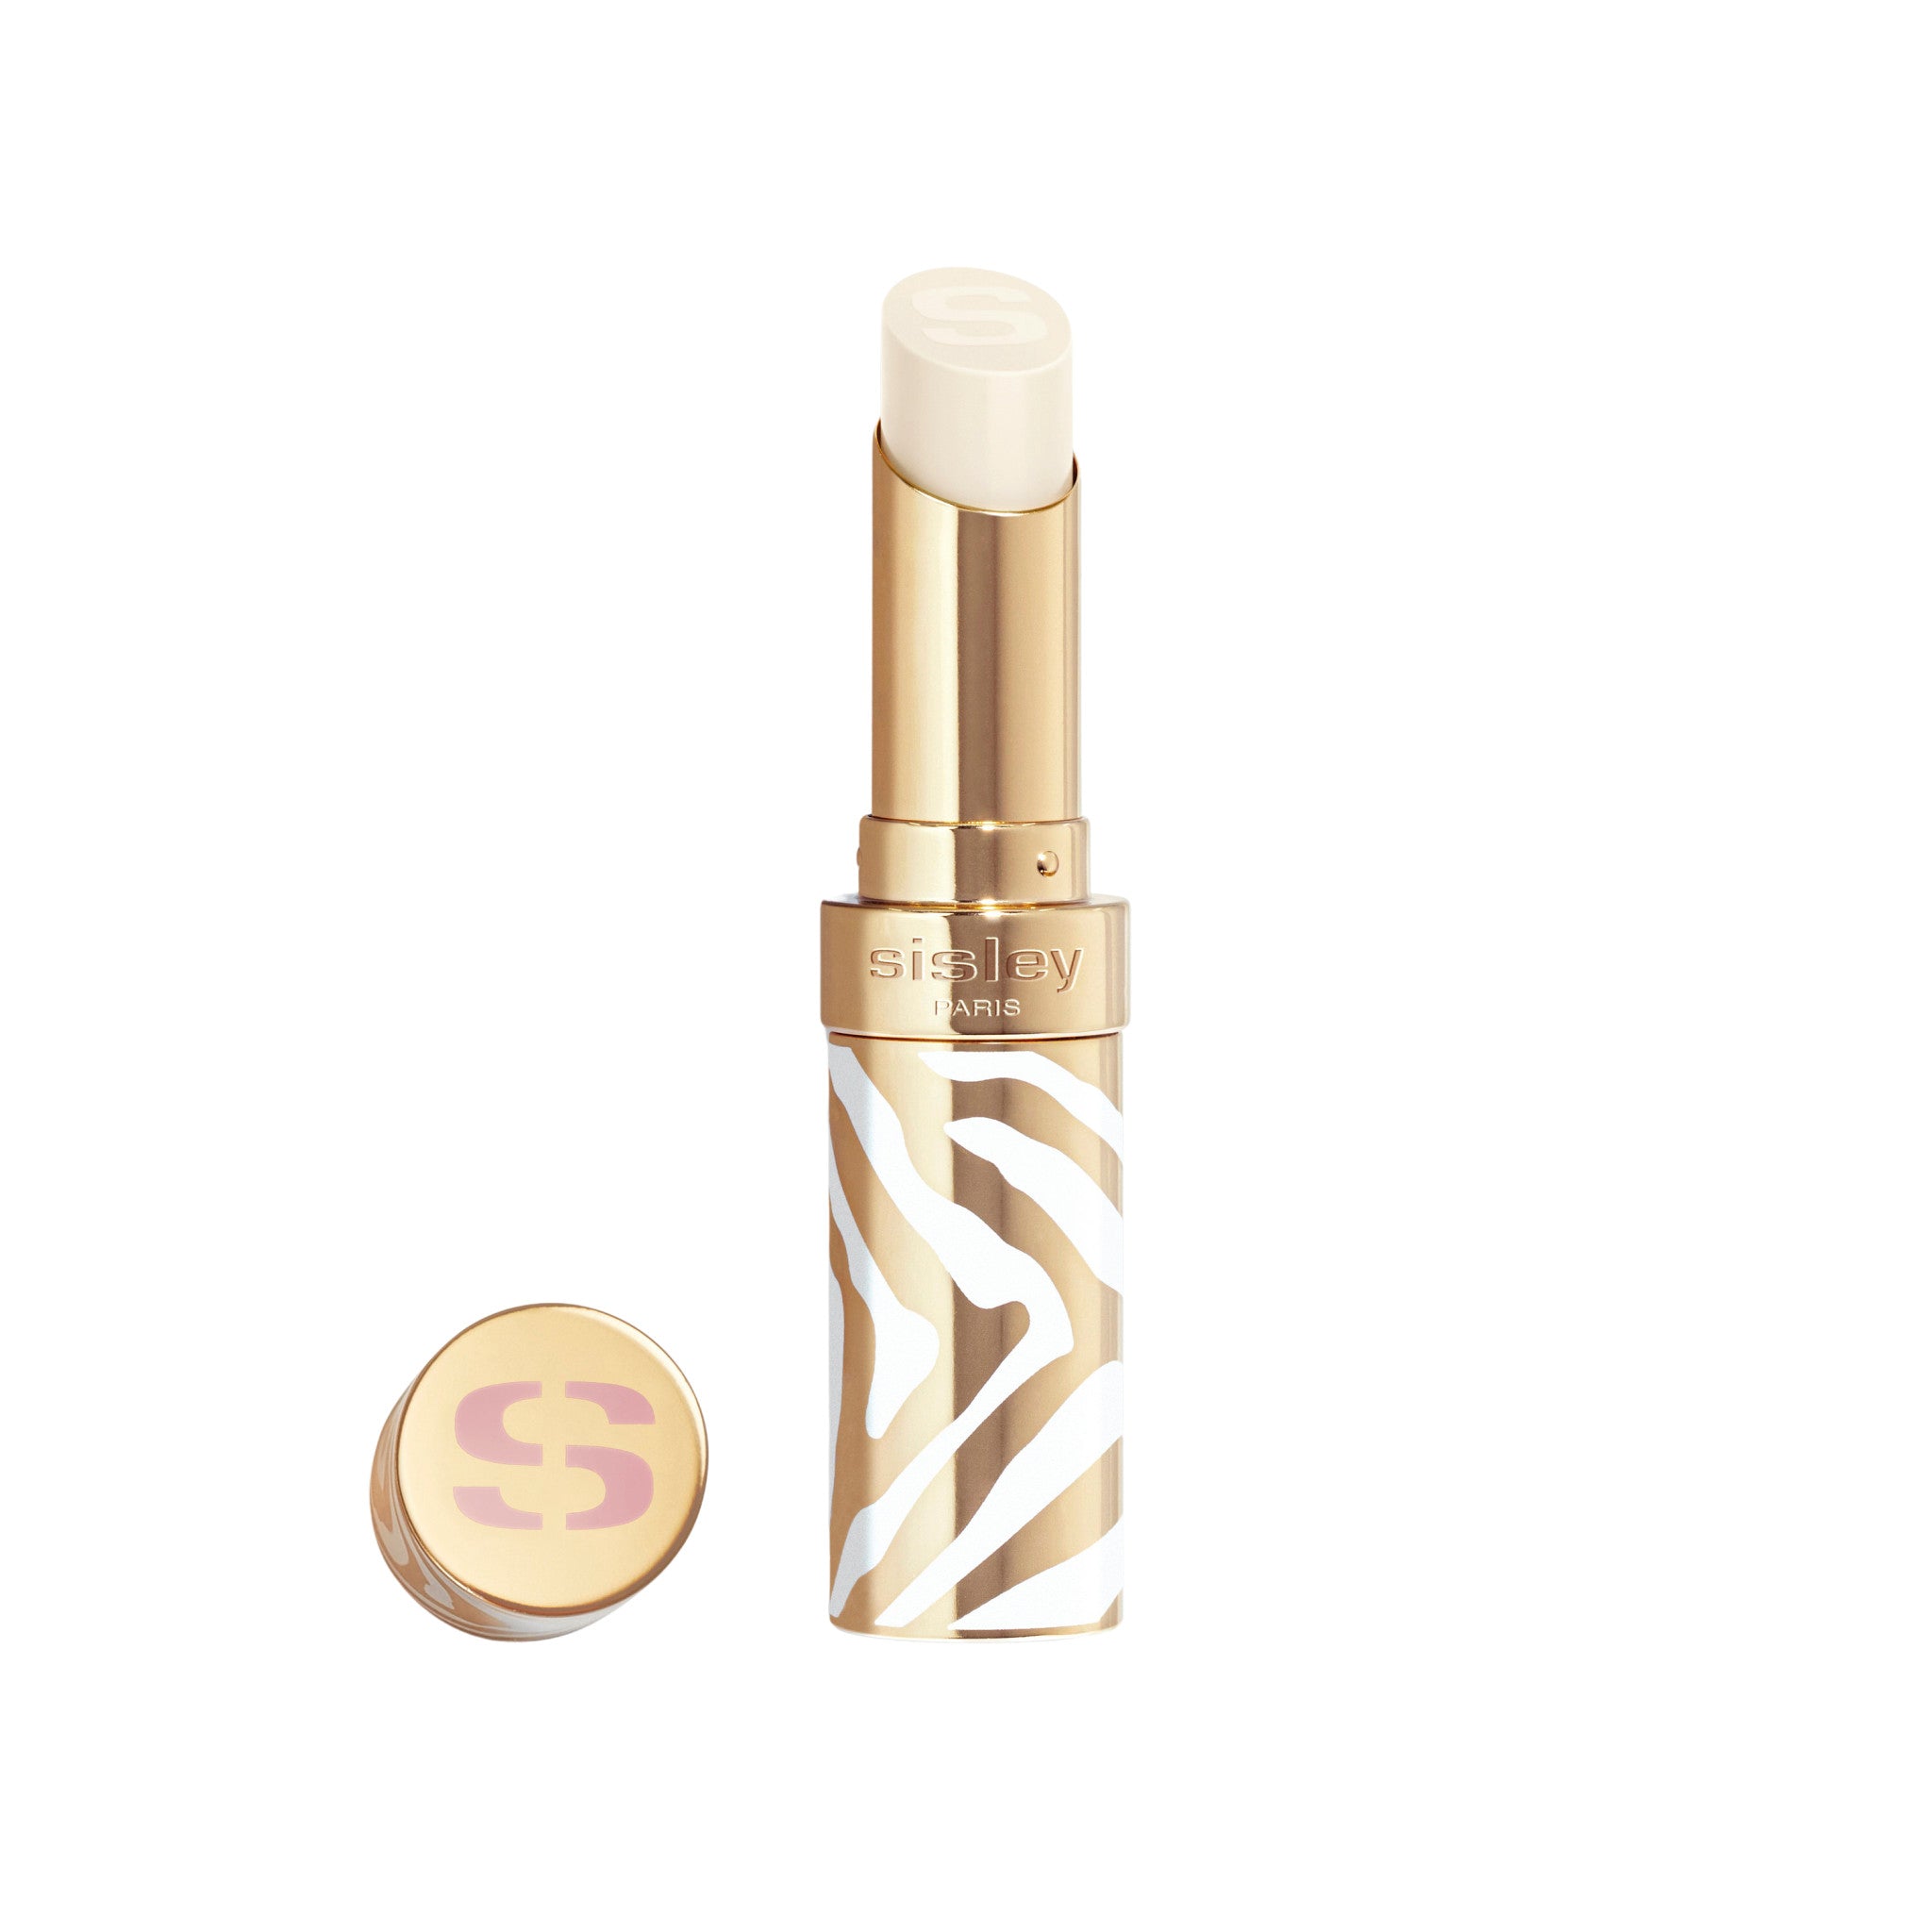 Sisley-Paris Phyto-Lip Balm Color/Shade variant: Cloud main image. This product is in the color clear